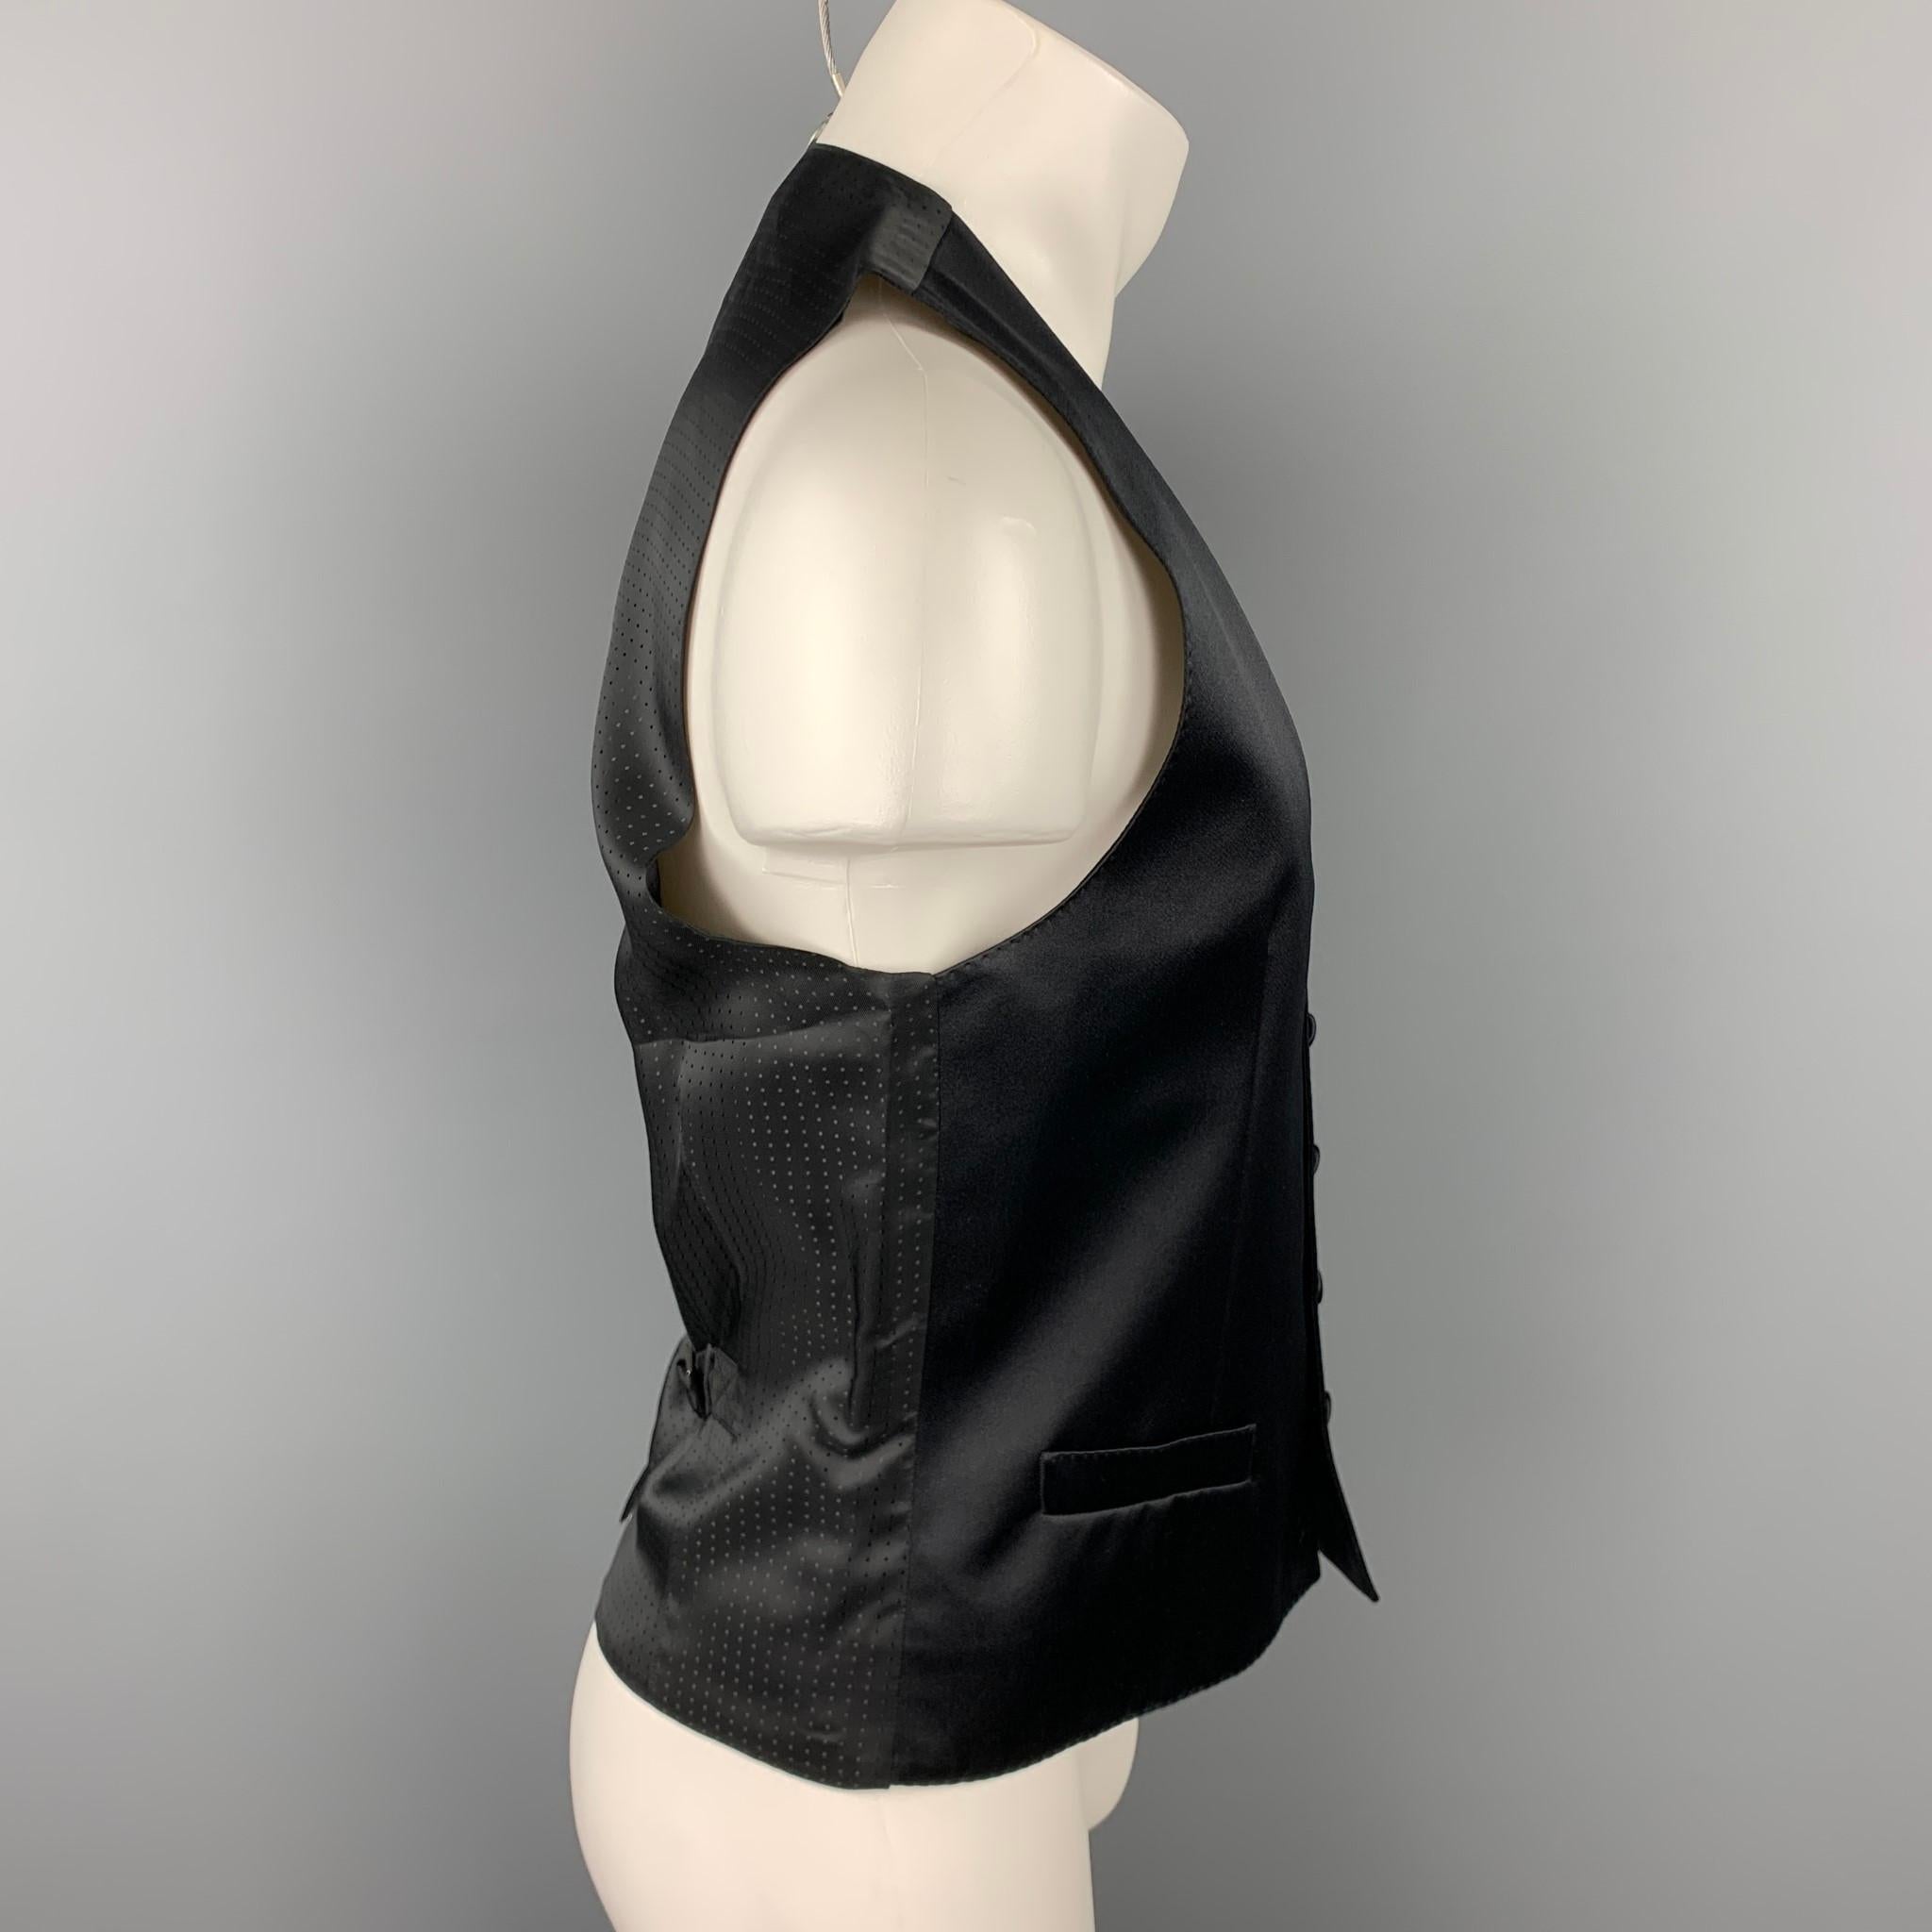 DOLCE & GABBANA dress vest comes in a black silk blend featuring a back belt, slit pockets, and a buttoned closure. Missing button. Made in Italy.

Very Good Pre-Owned Condition.
Marked: IT 48

Measurements:

Shoulder: 14 in. 
Chest: 38 in. 
Length: